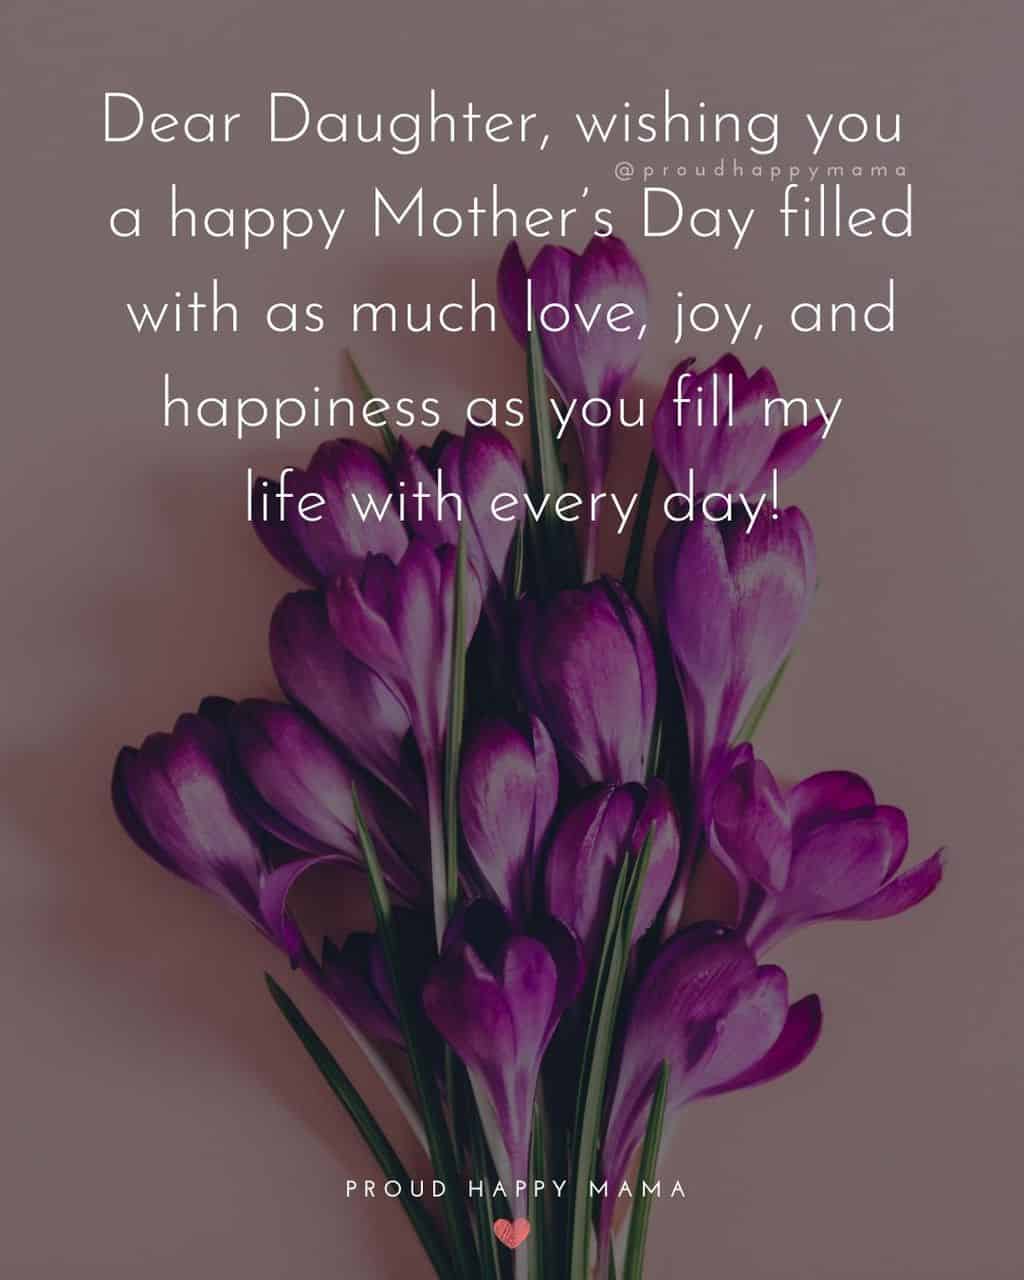 Happy Mothers Day Quotes To Daughter - Dear Daughter, wishing you a happy Mother’s Day filled with as much love, joy, and happiness